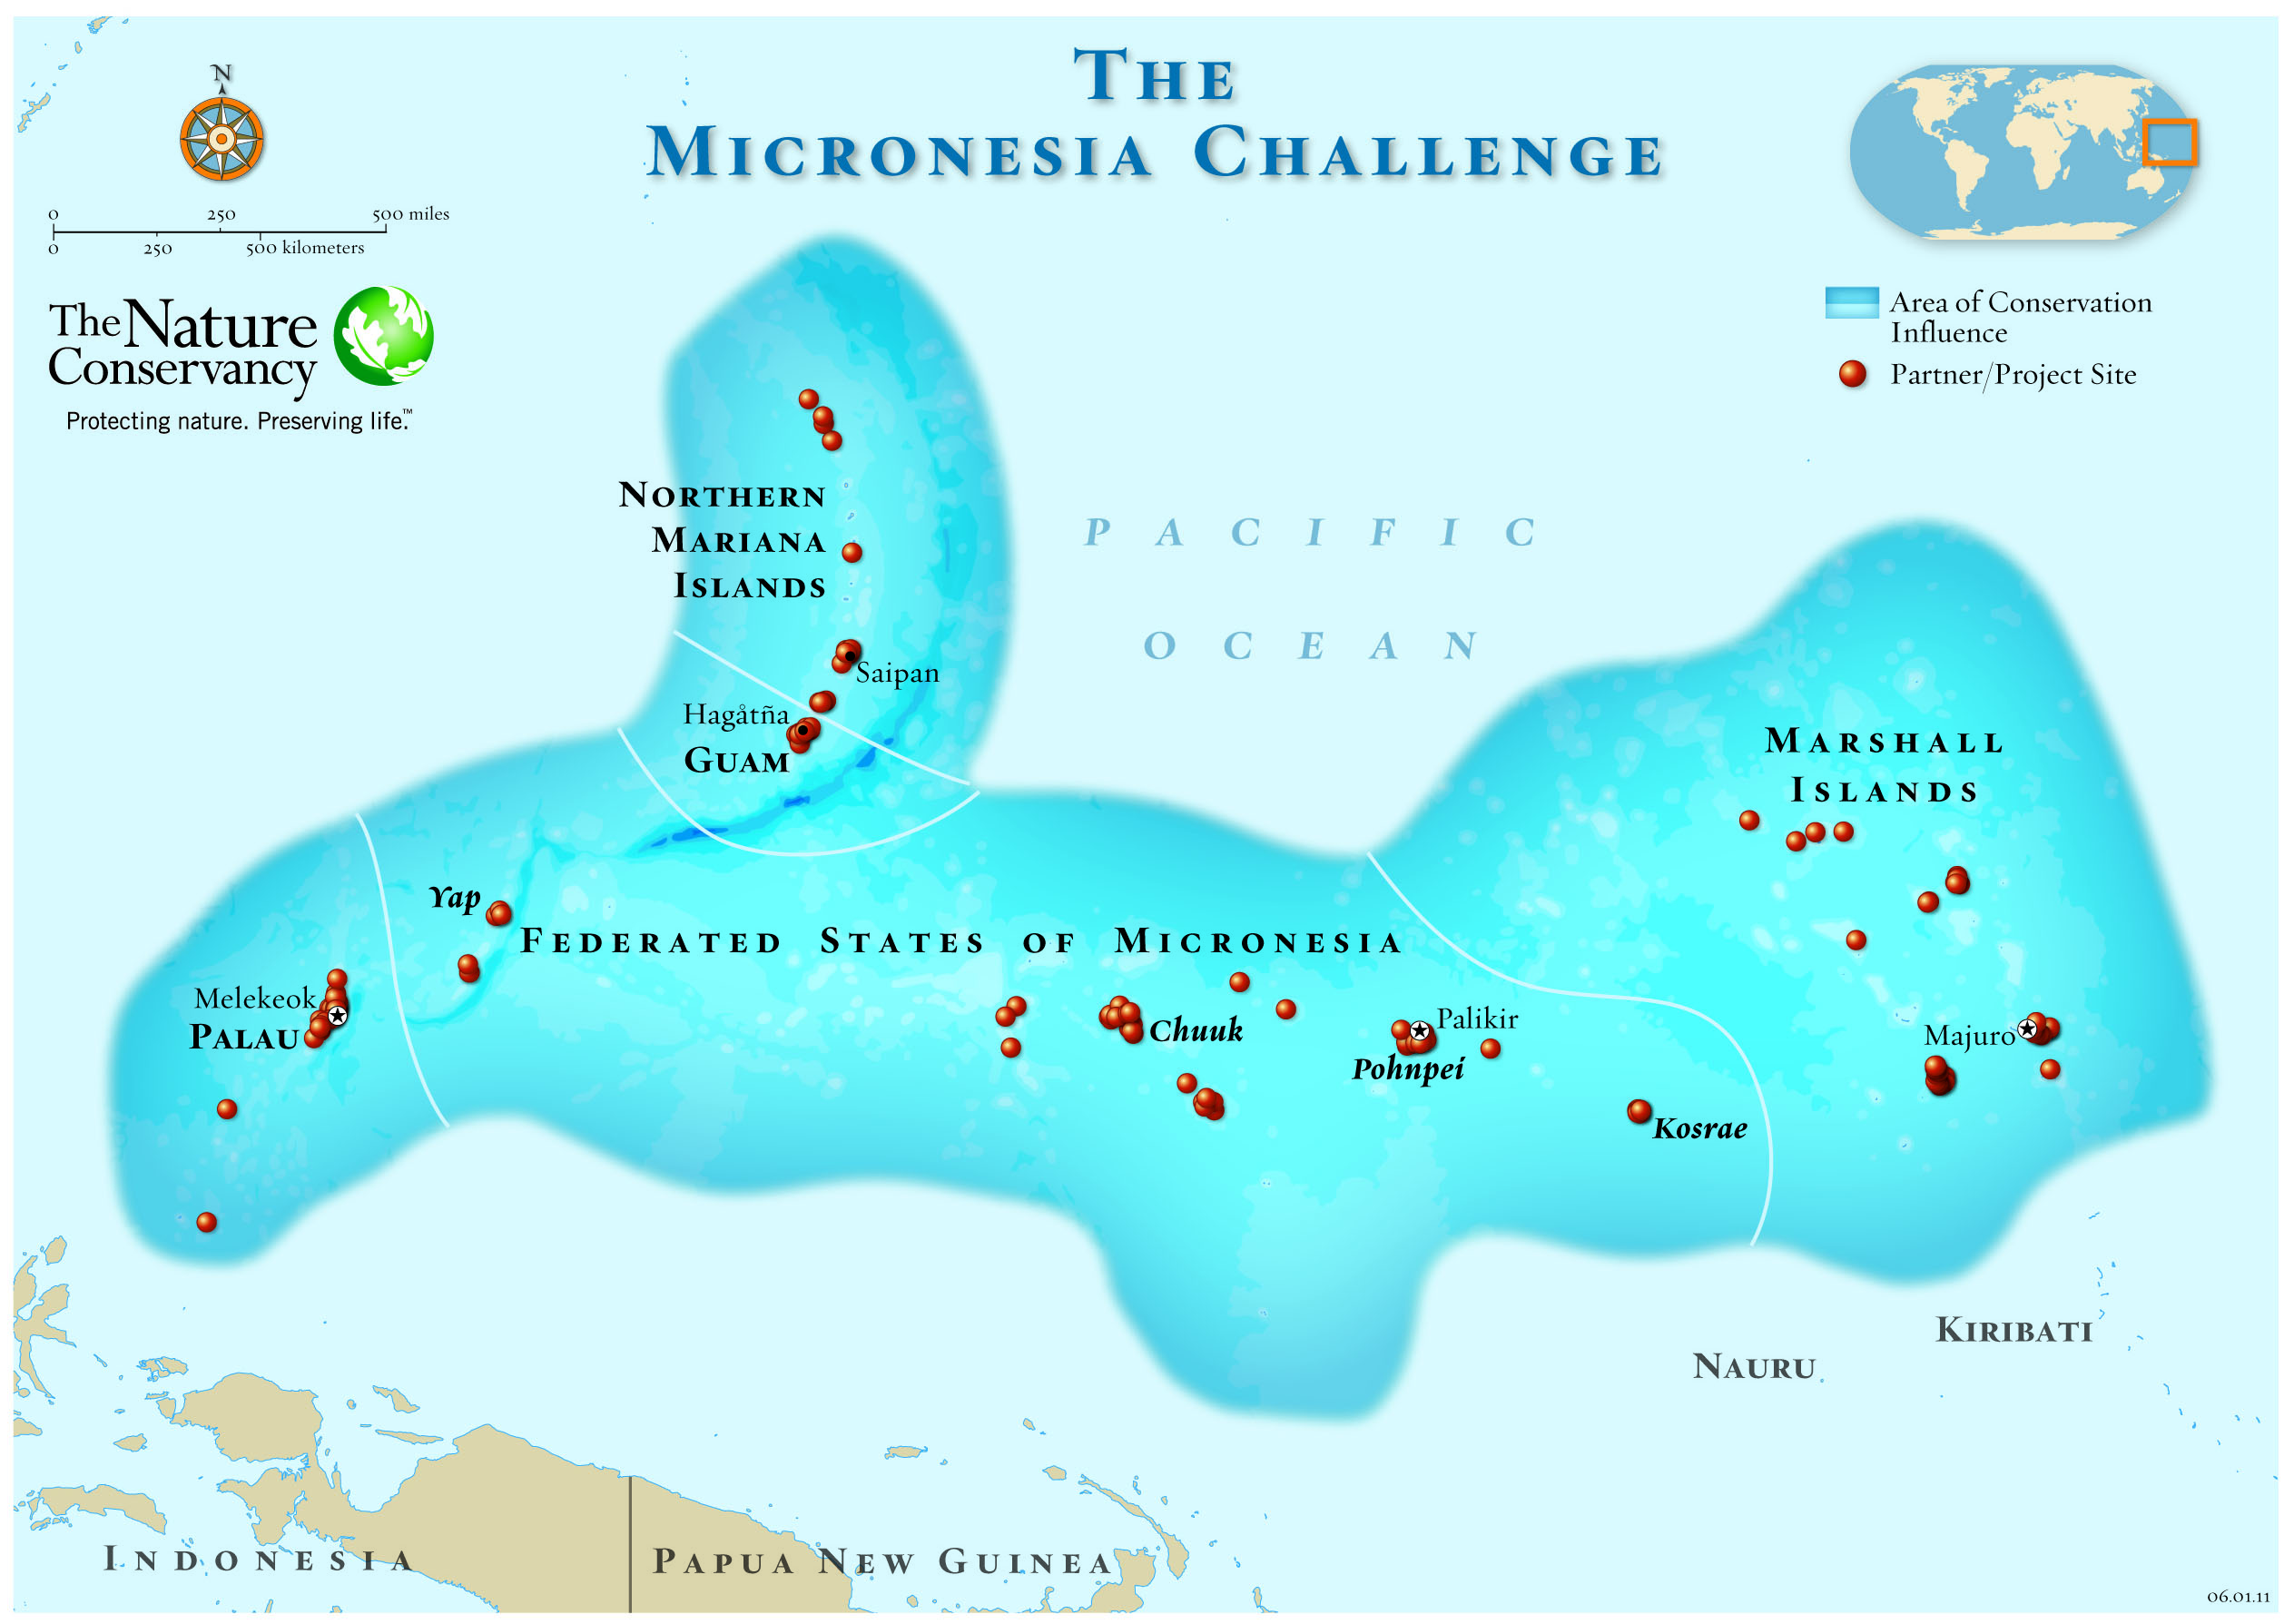 Micronesia Challenge - Division of Coastal Resources Management